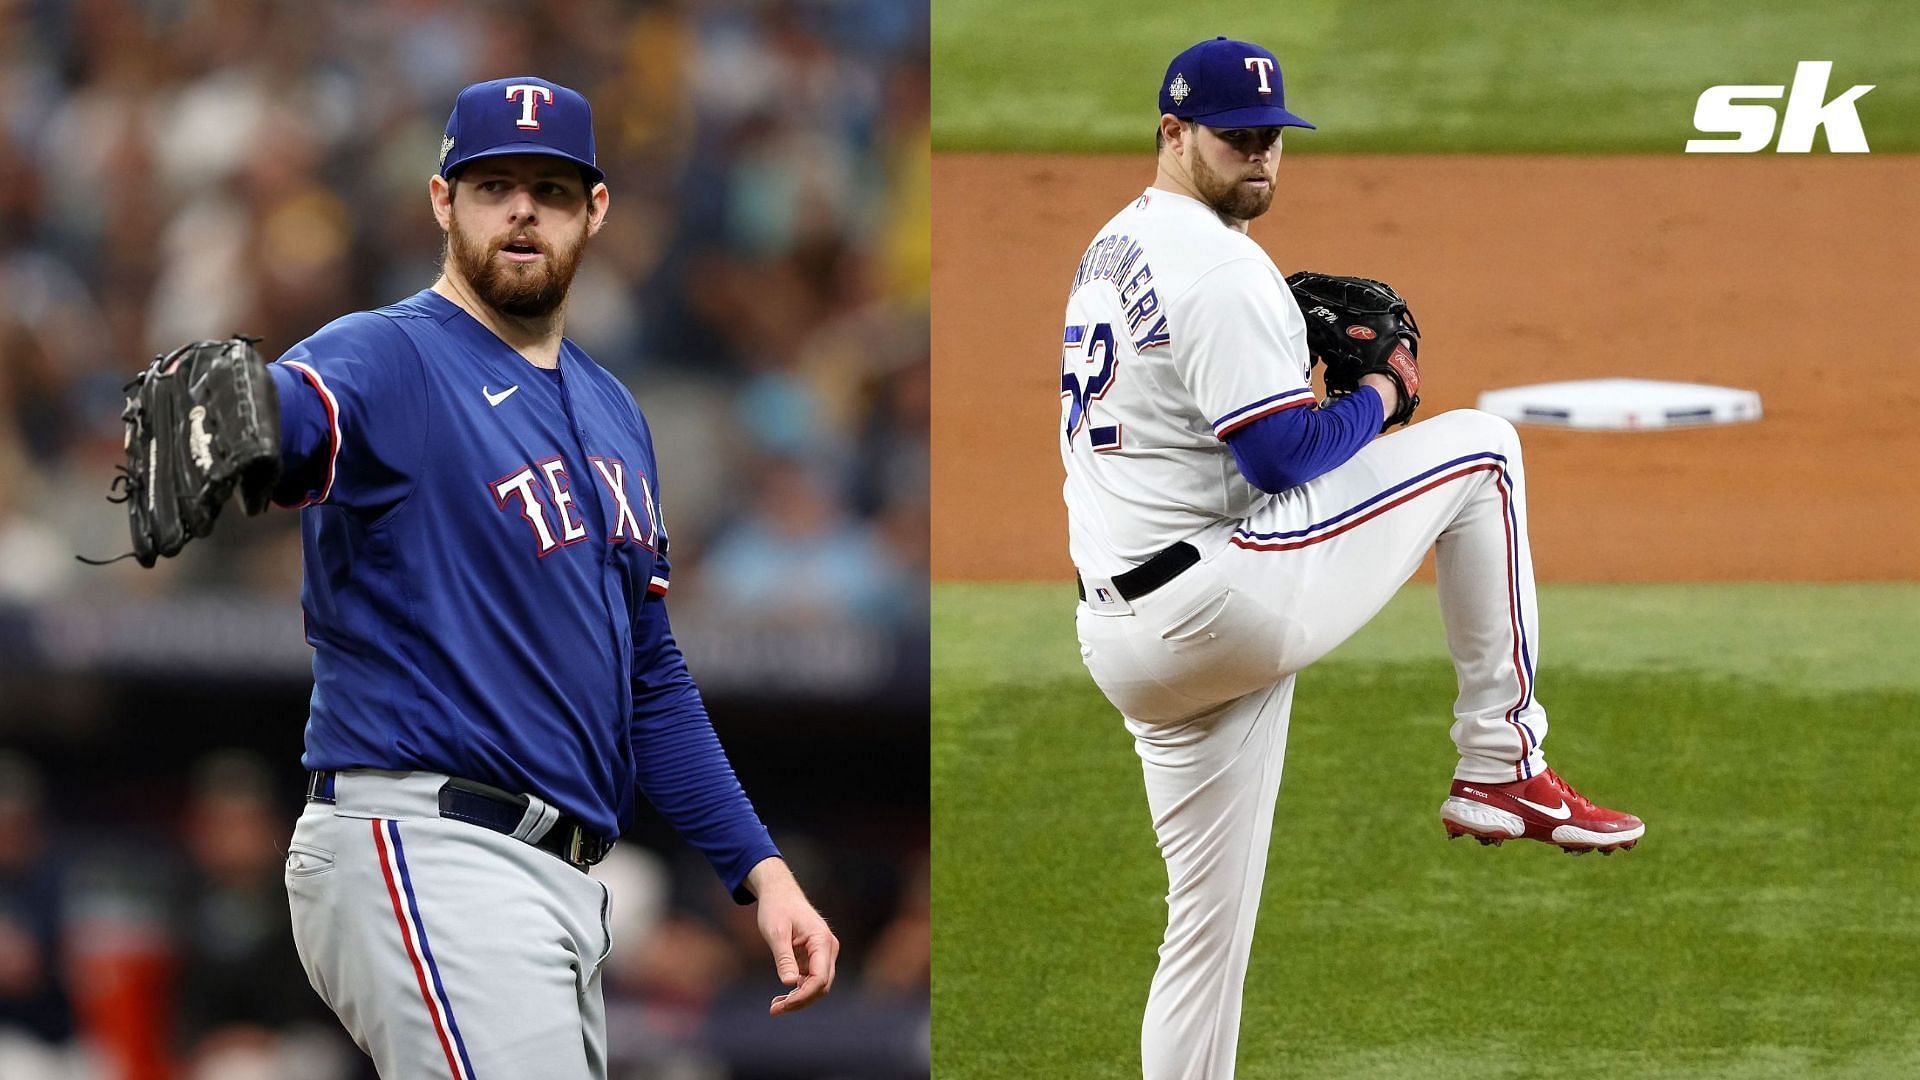 A potential reunion between the Texas Rangers and Jordan Montgomery remains unclear